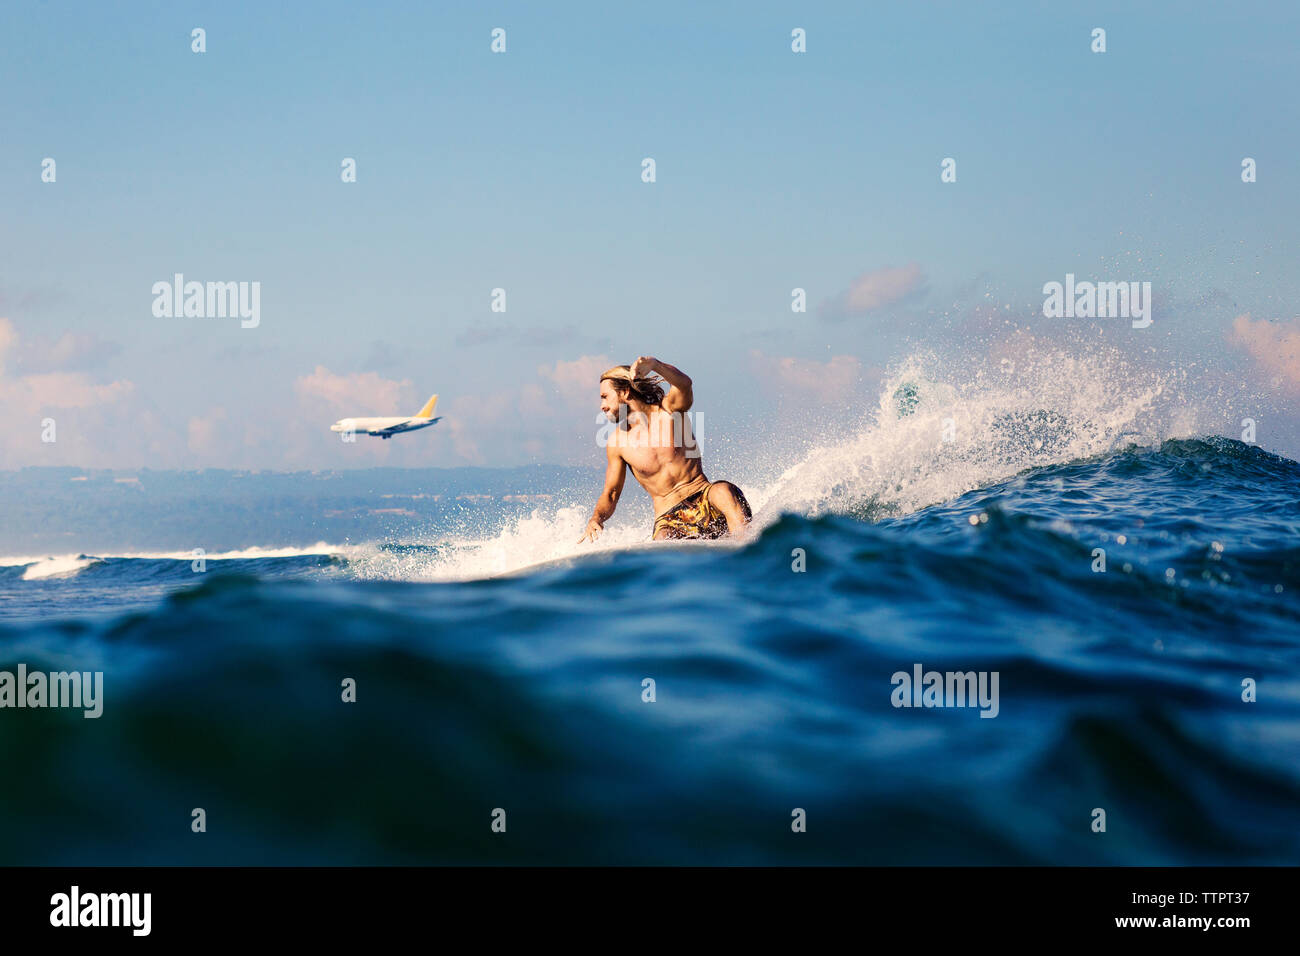 Mid adult man surfing in sea Stock Photo